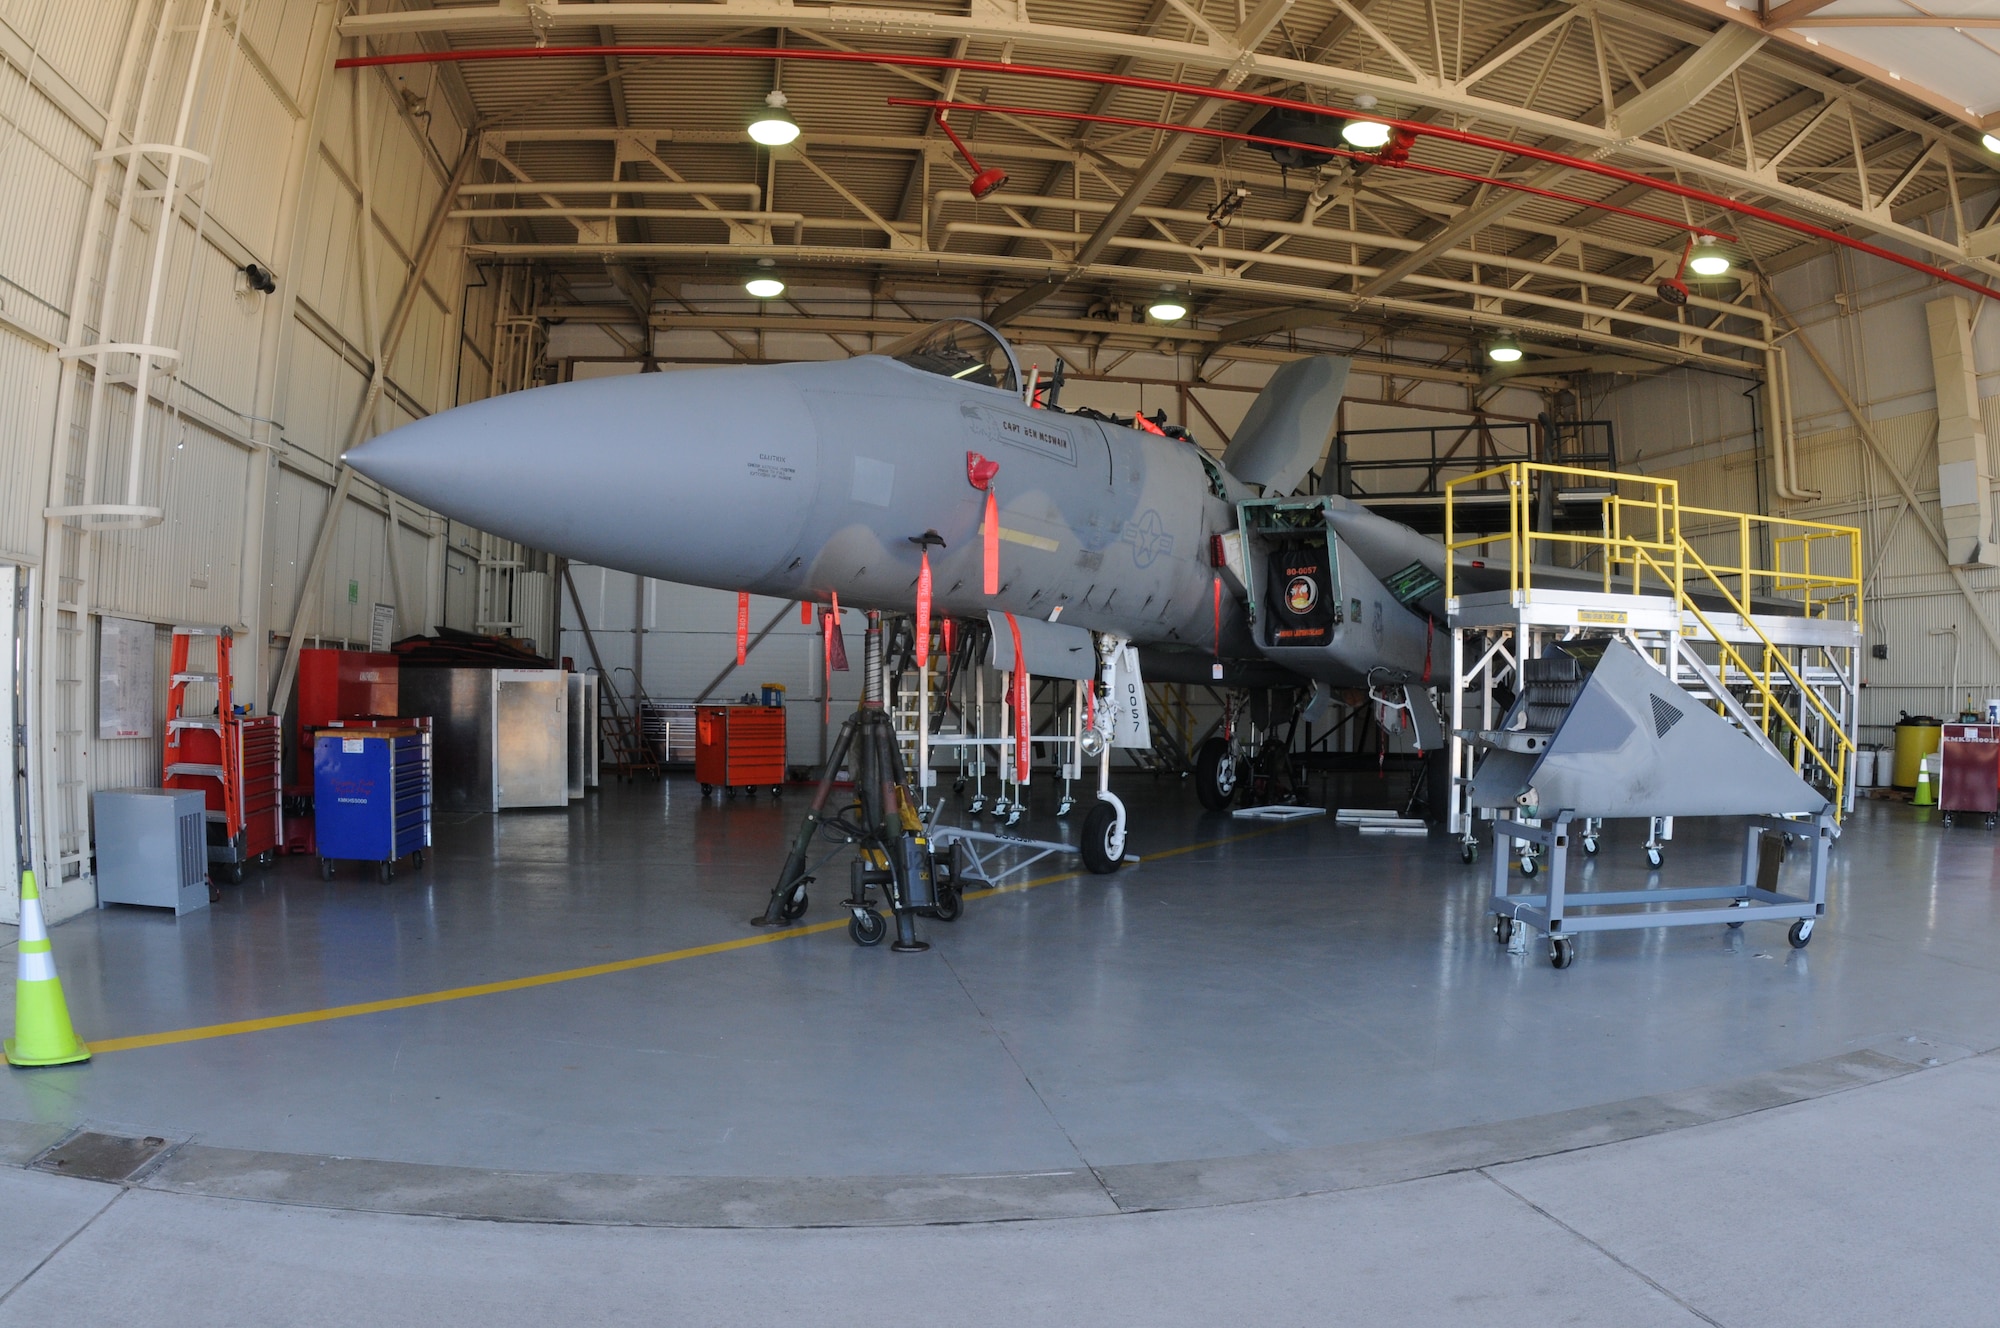 An Oregon Air National Guard F-15 Eagle from the 173rd Fighter Wing is almost unrecognizable as a fighter aircraft with multiple pieces missing from its body while sitting in the hangar at Kingsley Field, in Klamath Falls, Ore. Oct. 16, 2014.  This aircraft is going through phase maintenance where the 173rd FW maintainers closely inspect the aircraft for cracks and other types of damage, verifying that the 30 plus year old aircraft is safe to fly.  (U.S. Air National Guard photo by Master Sgt. Jennifer Shirar/Released)  